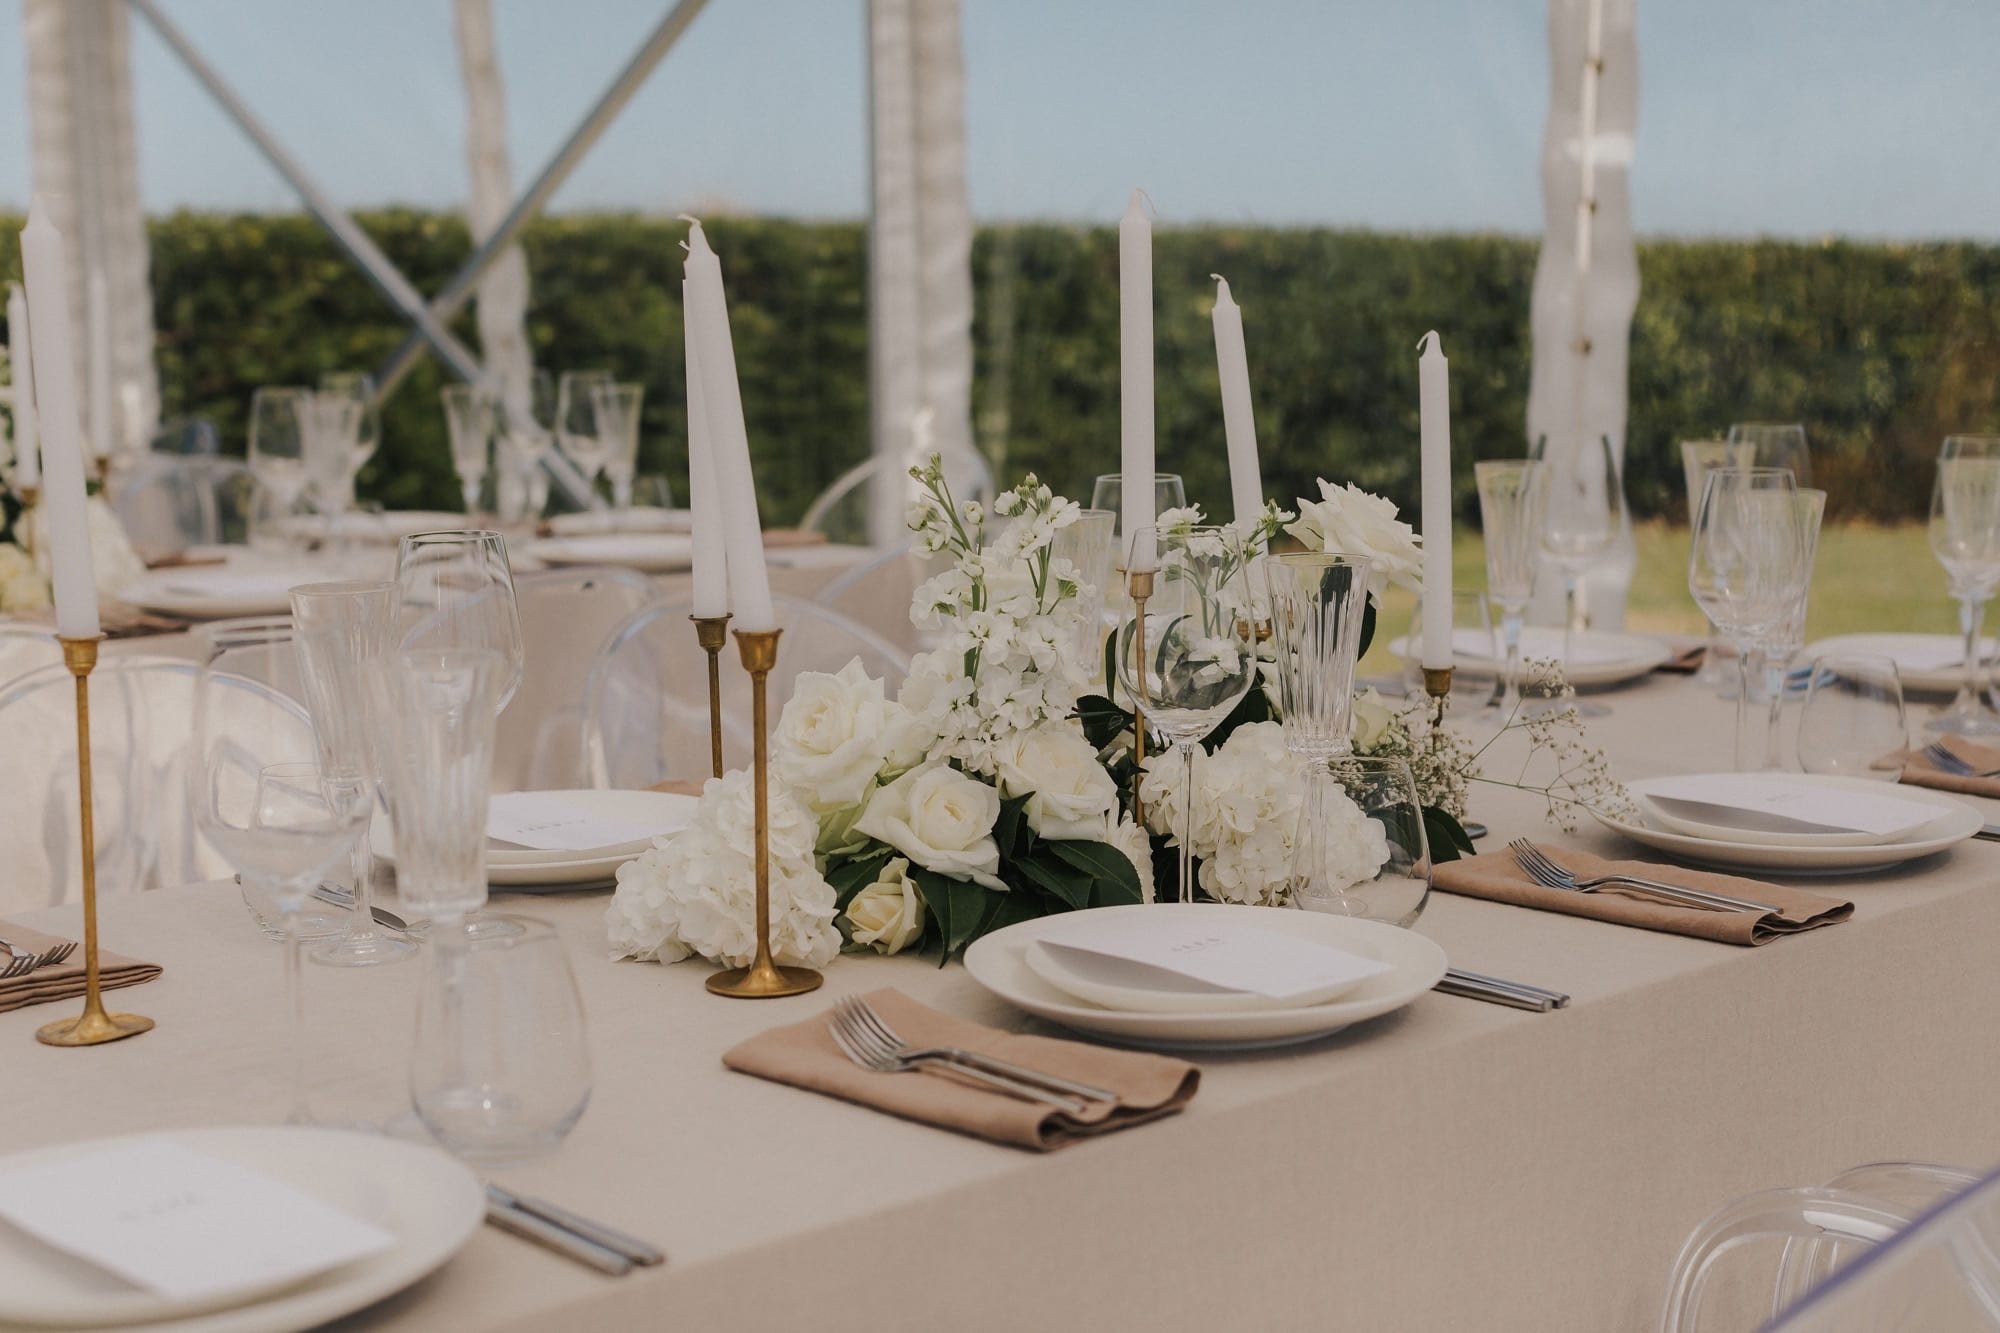 6m-marquee-clear-north-island-new-zealand-tables-ruby-chair-circle-table-ribbed-arch-florals-bride-groom-lighting-intimate-wedding-1.jpeg